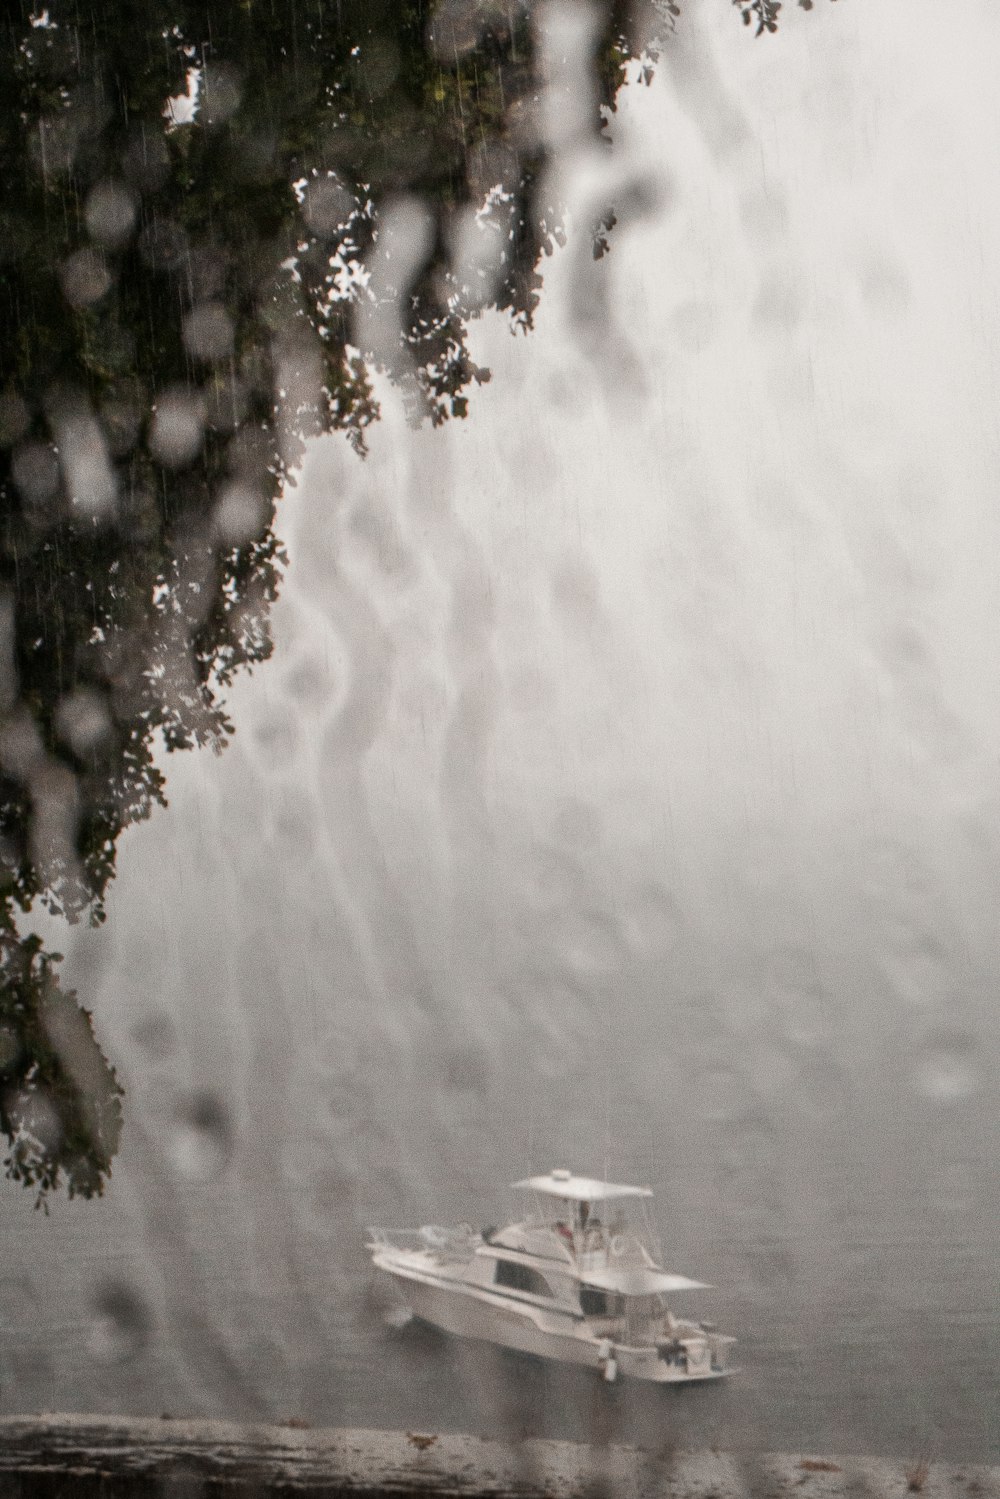 a boat is seen through a window on a rainy day